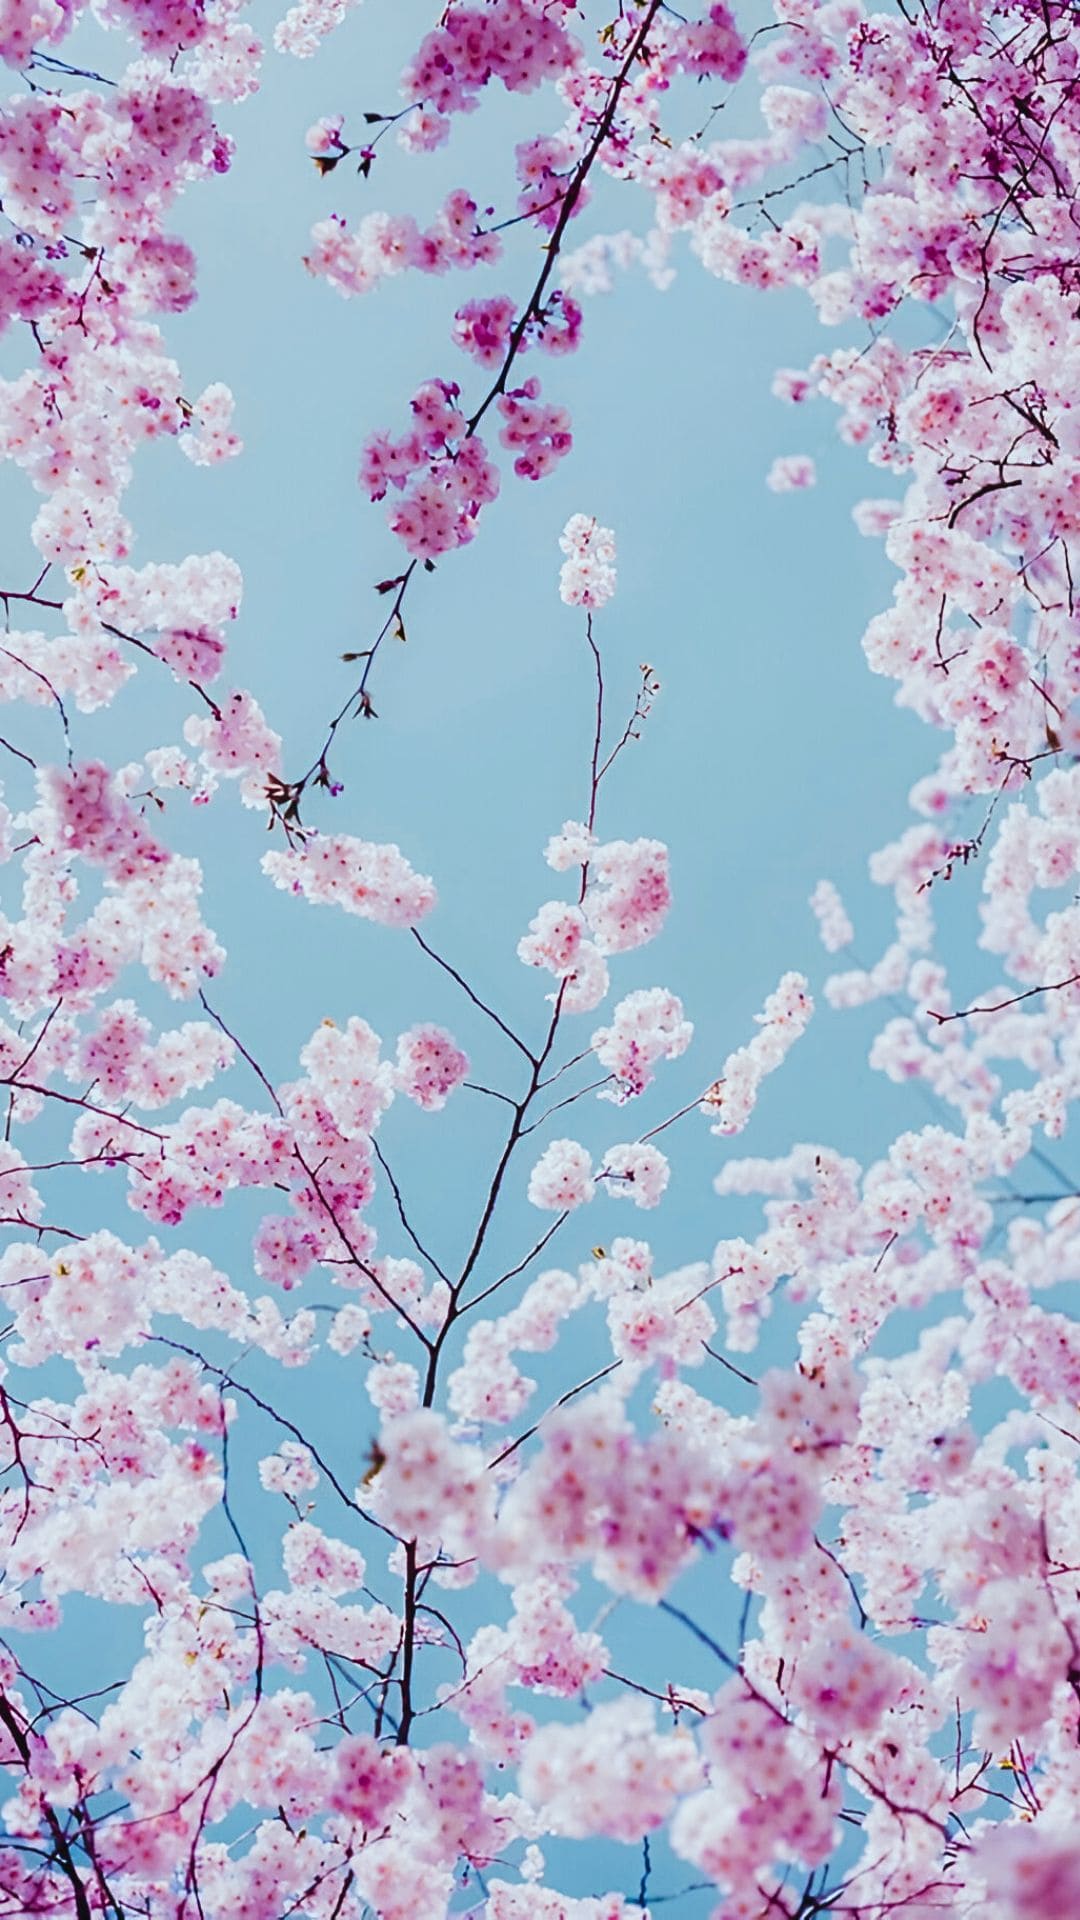 Aesthetic Spring Image